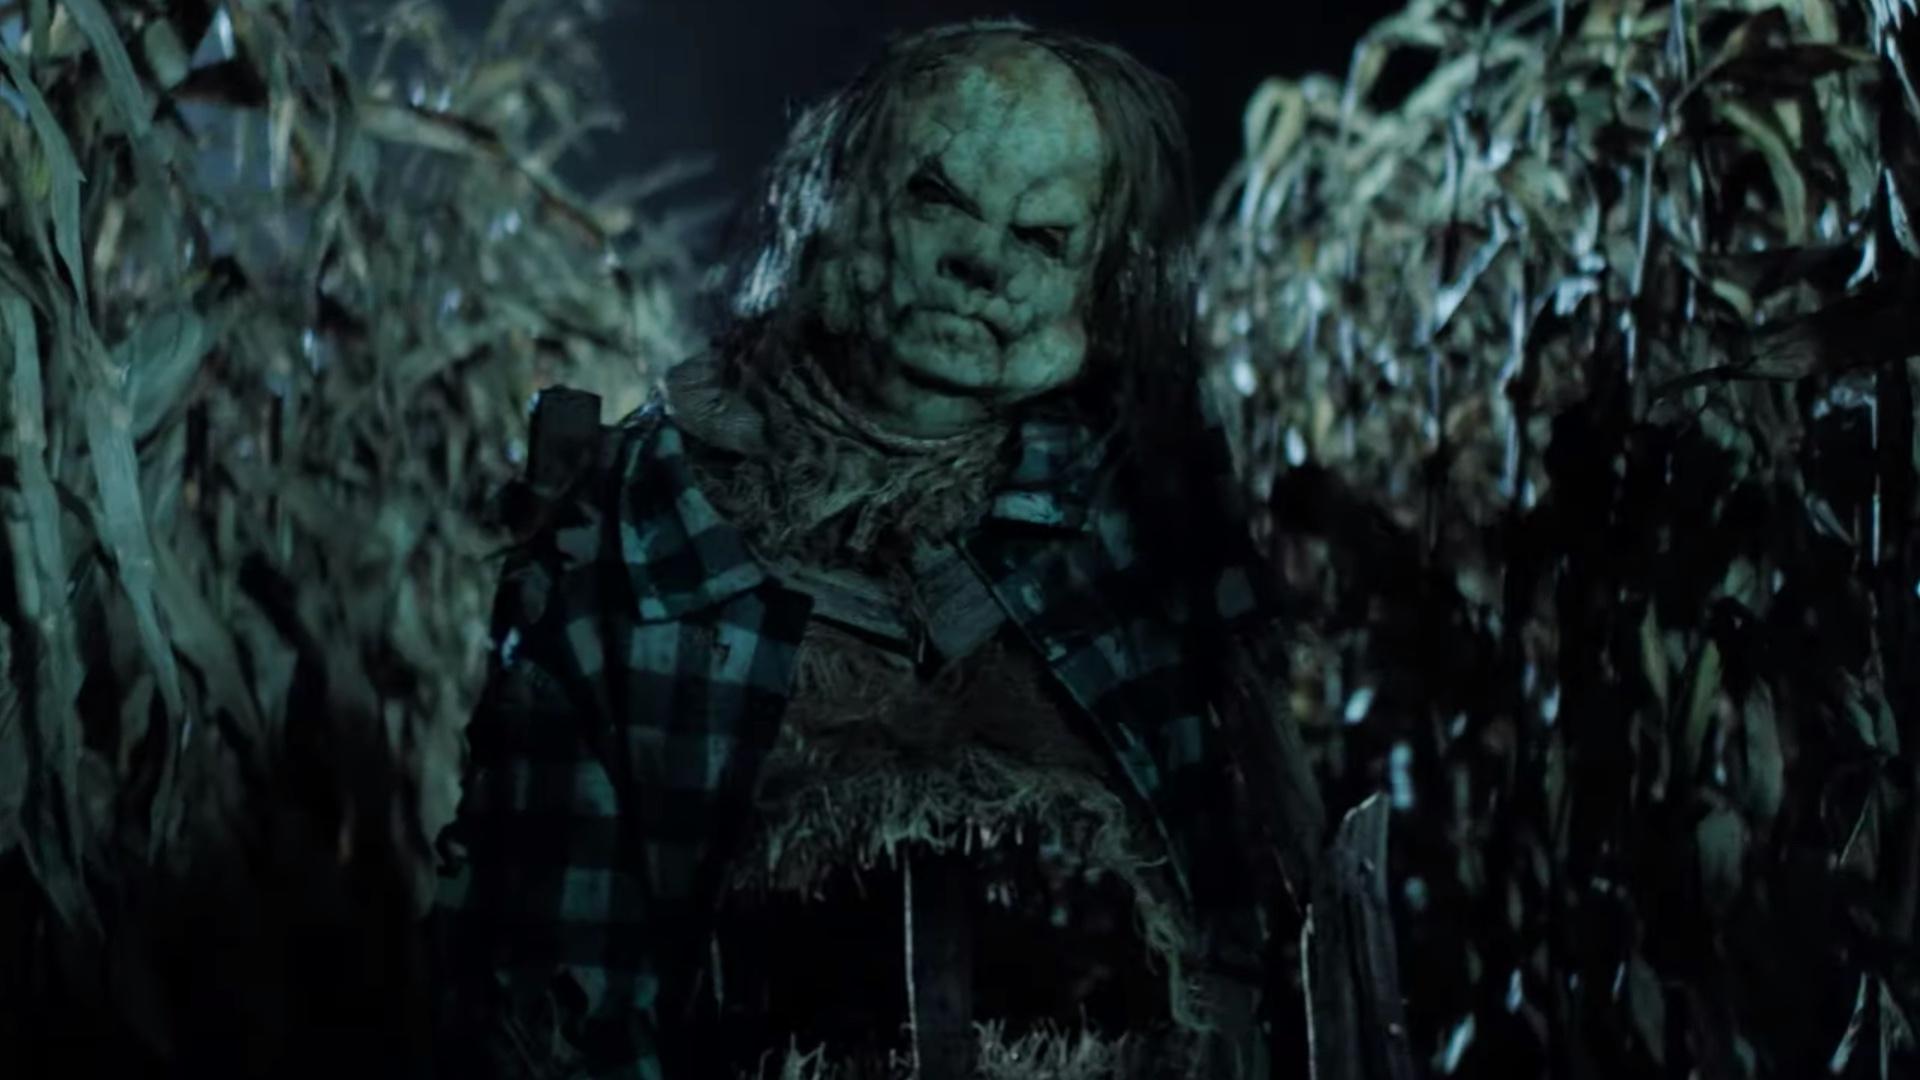 Guillermo del Toro's SCARY STORIES TO TELL IN THE DARK will be an